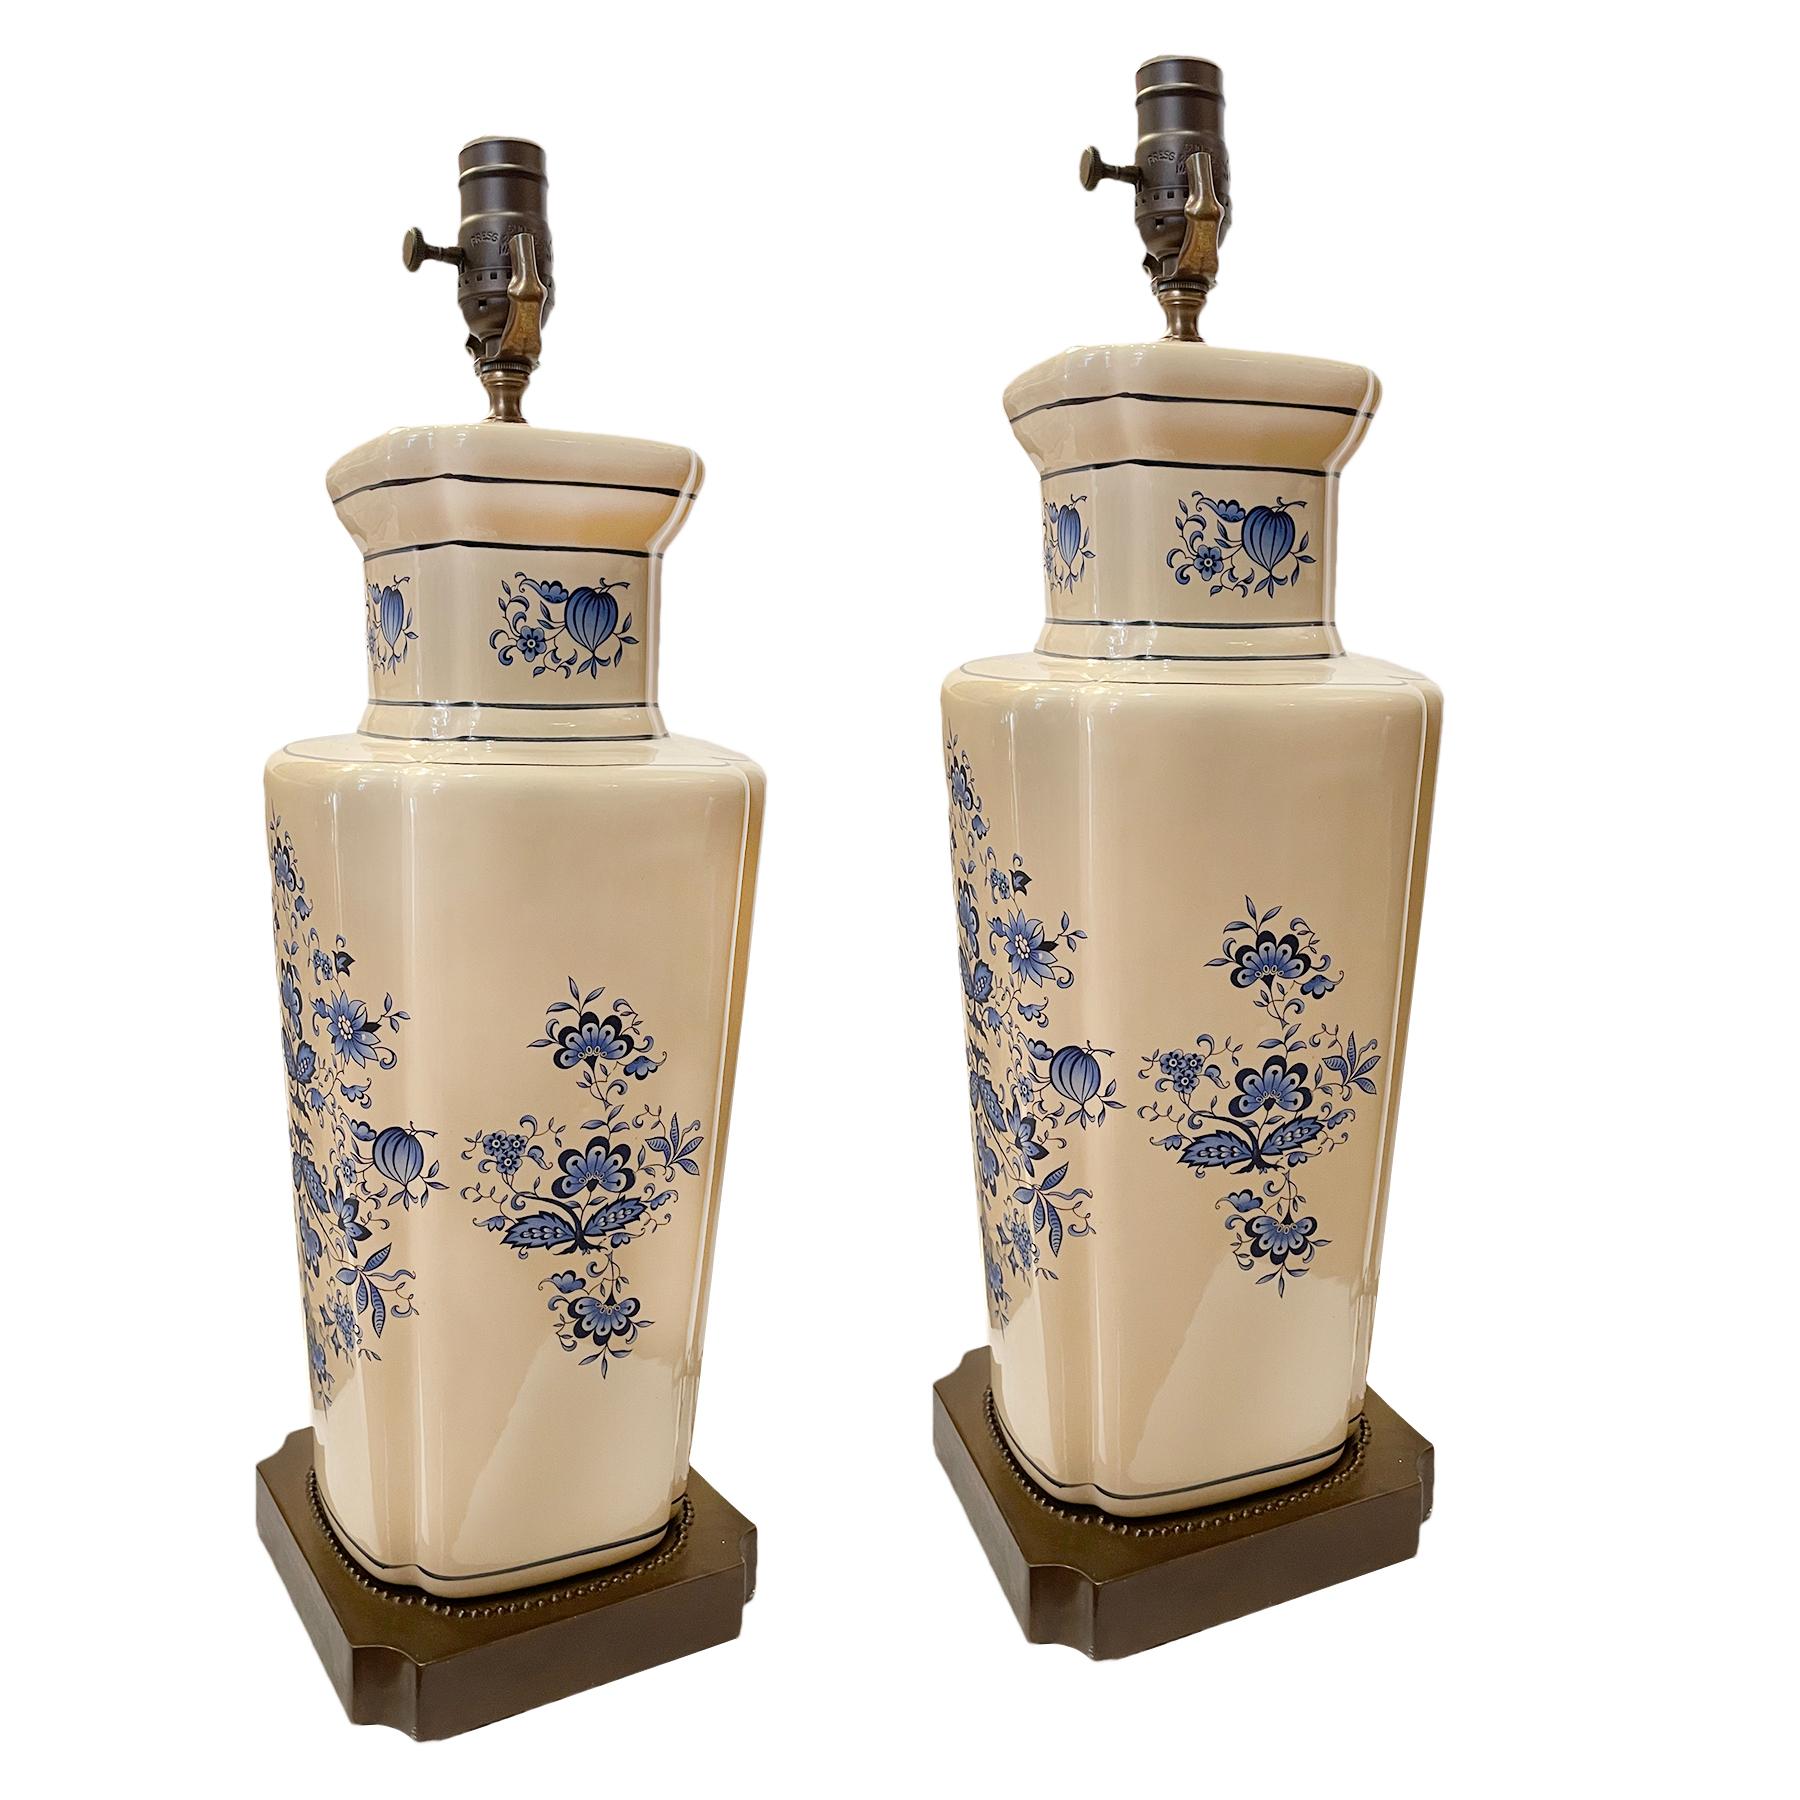 A pair of 1950's English cream porcelain lamps with floral decoration.

Measurements:
Height of body: 17.75